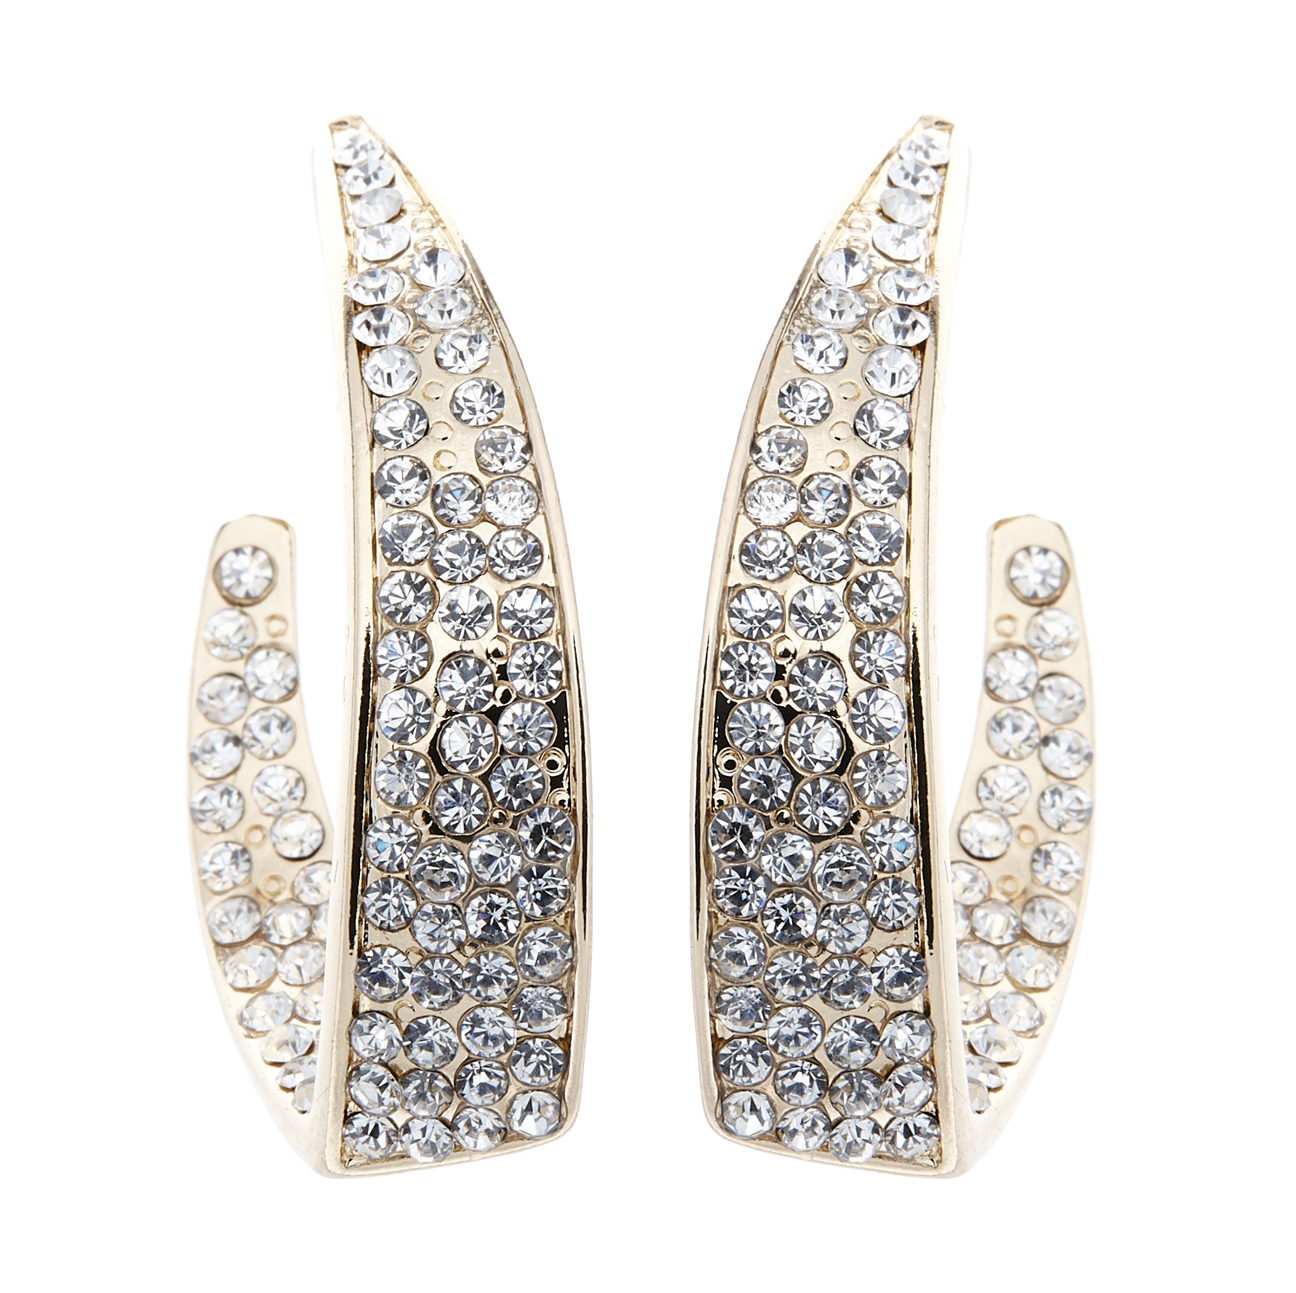 Clip On Earrings - Mila - gold luxury hoop earring with crystals